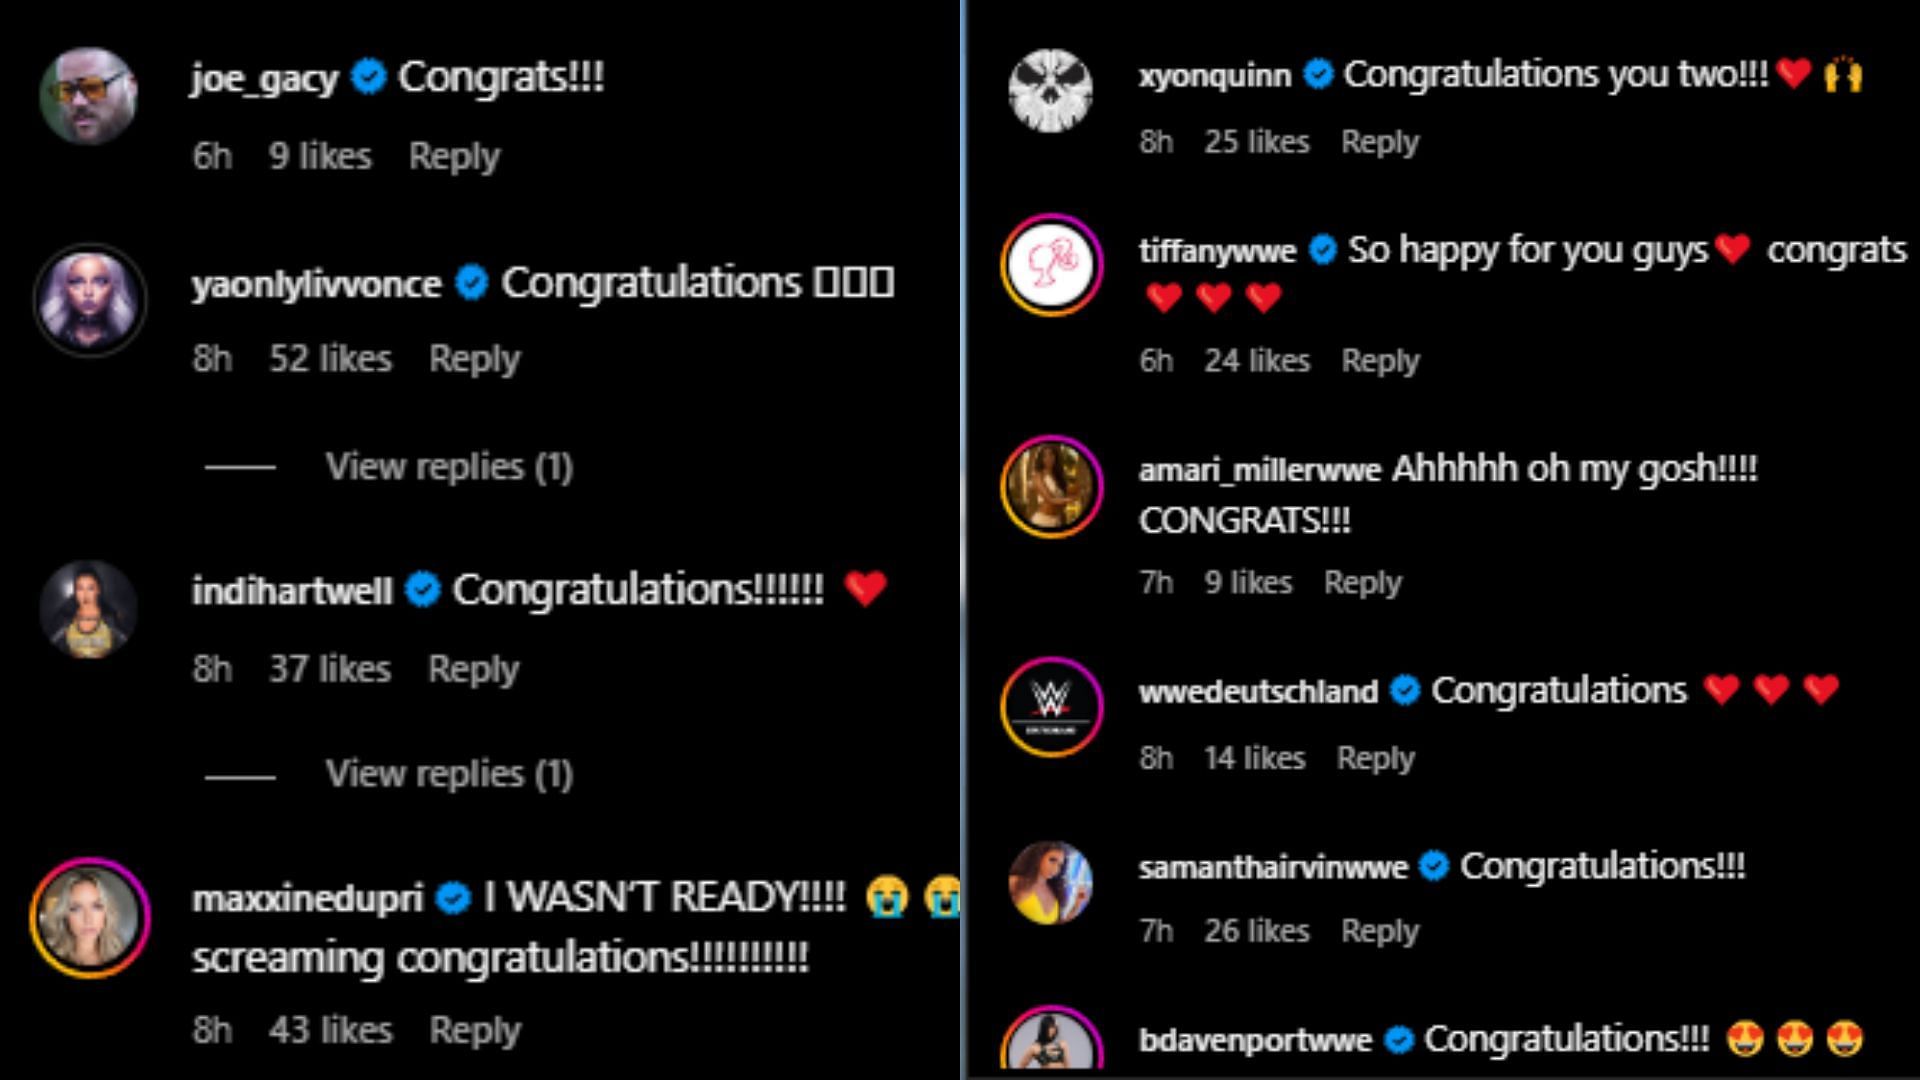 The stars' Instagram comments were flooded with well-wishes